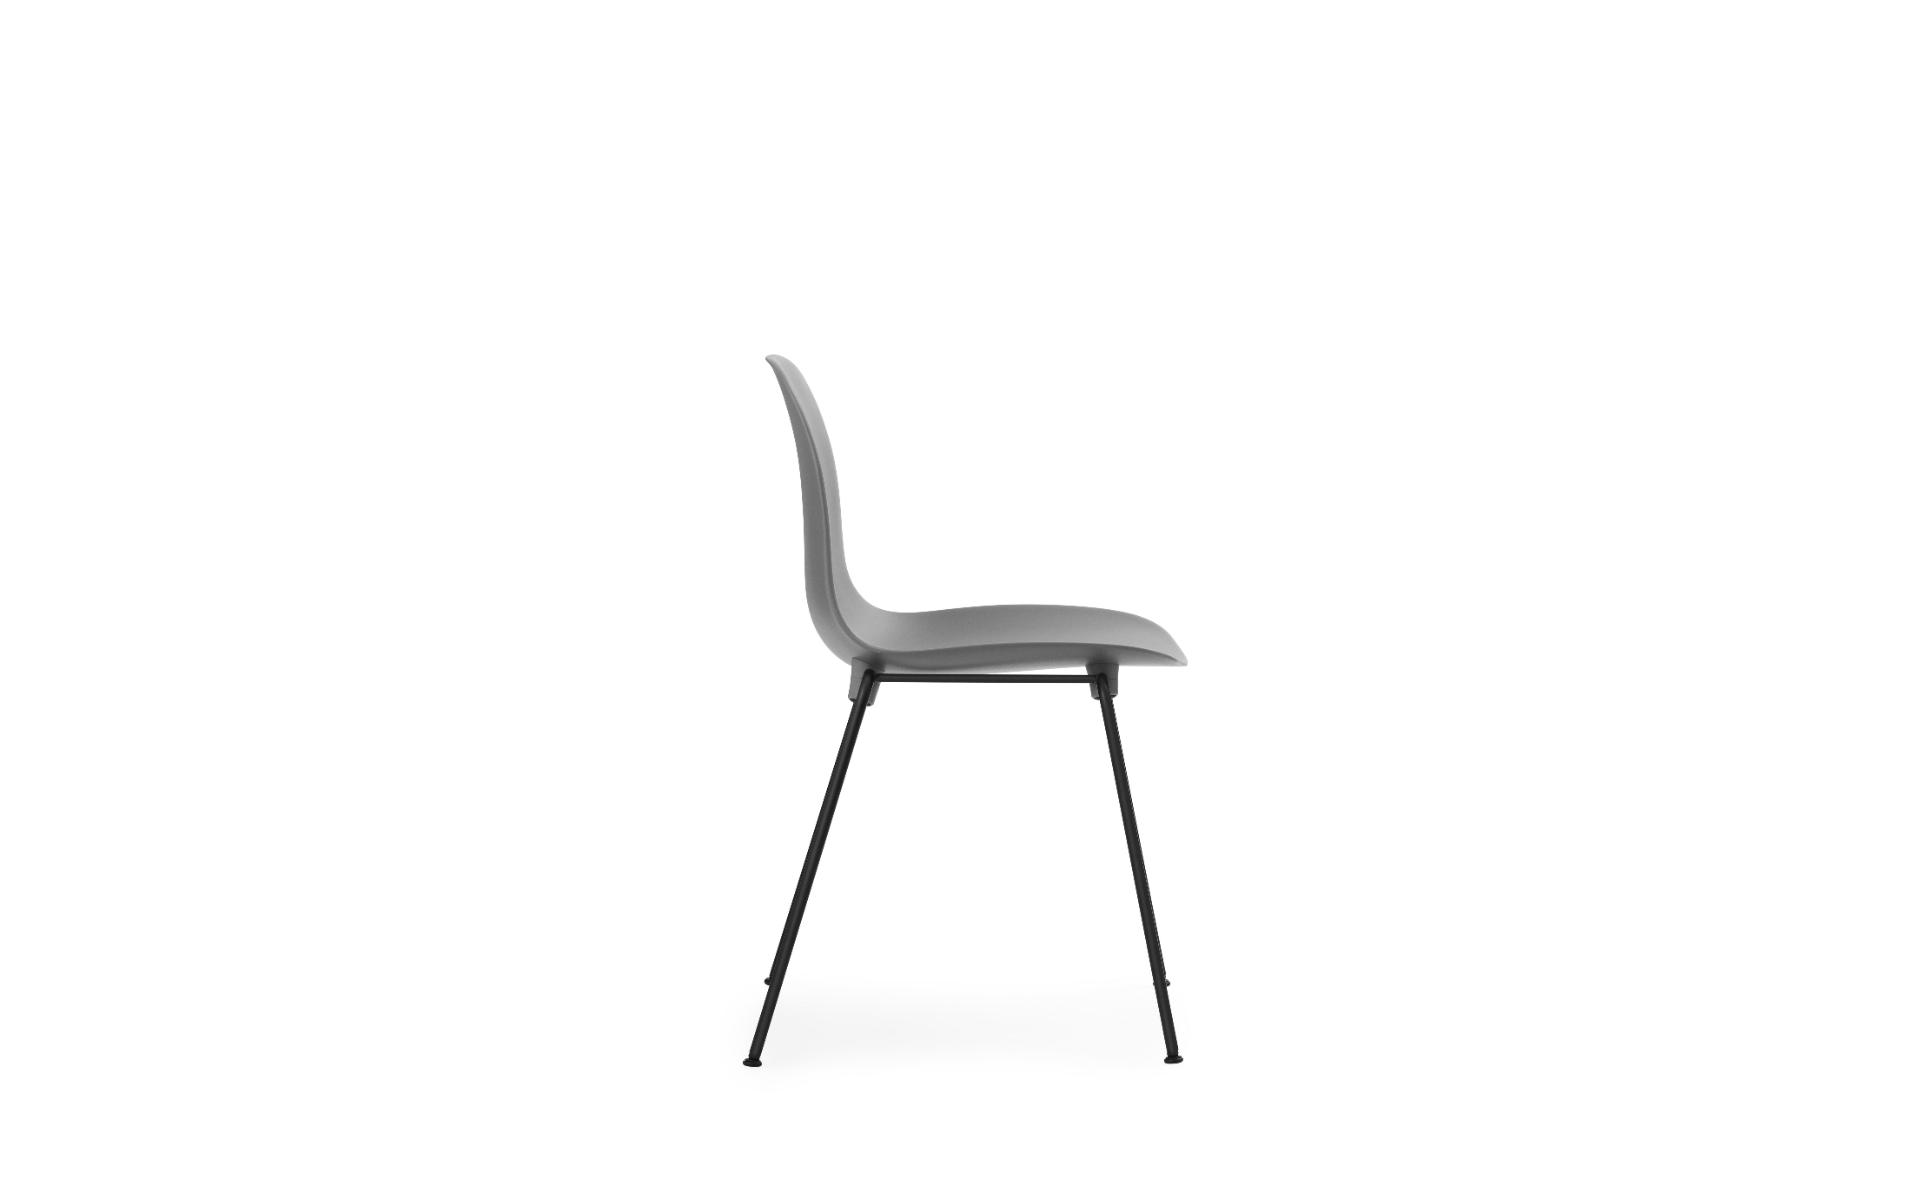 https://www.fundesign.nl/media/catalog/product/f/o/form_chair_stacking_black_steel3_3_.png